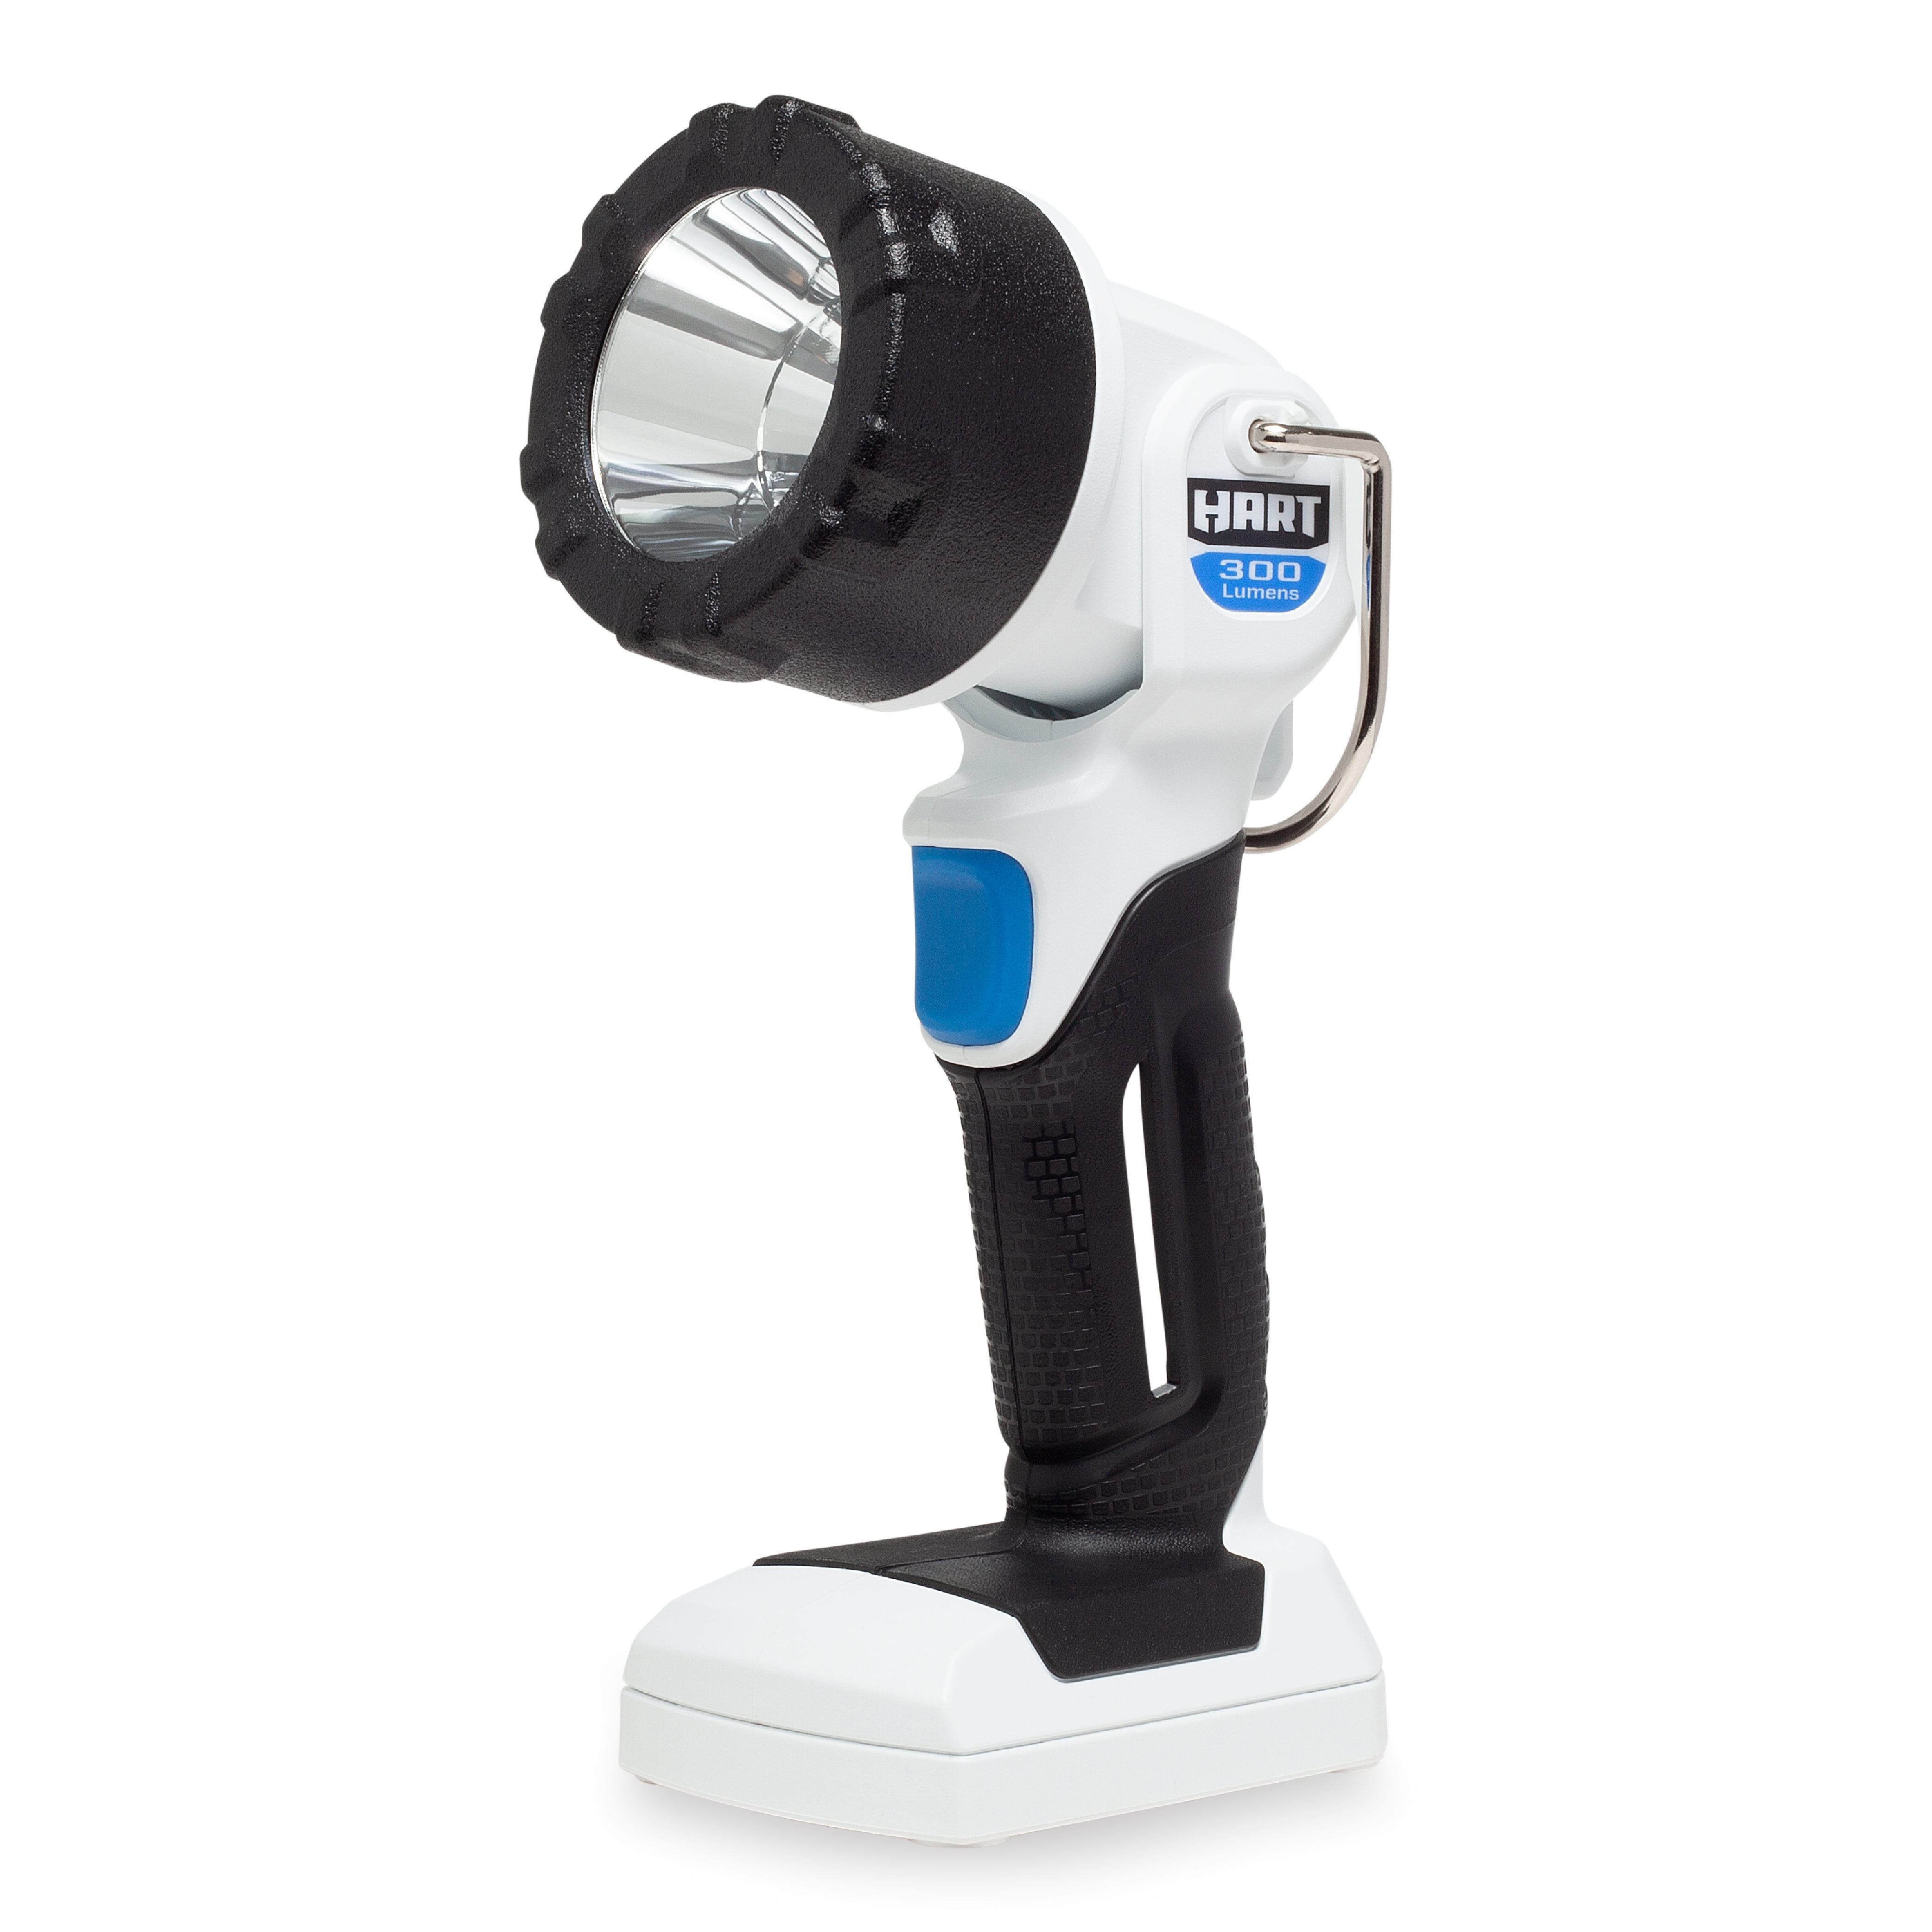 Hart 300 Lumens Rechargeable LED Work Light w/ Magnetic Base & Rotating Head $11.05  + Free S&H w/ Walmart+ or $35+